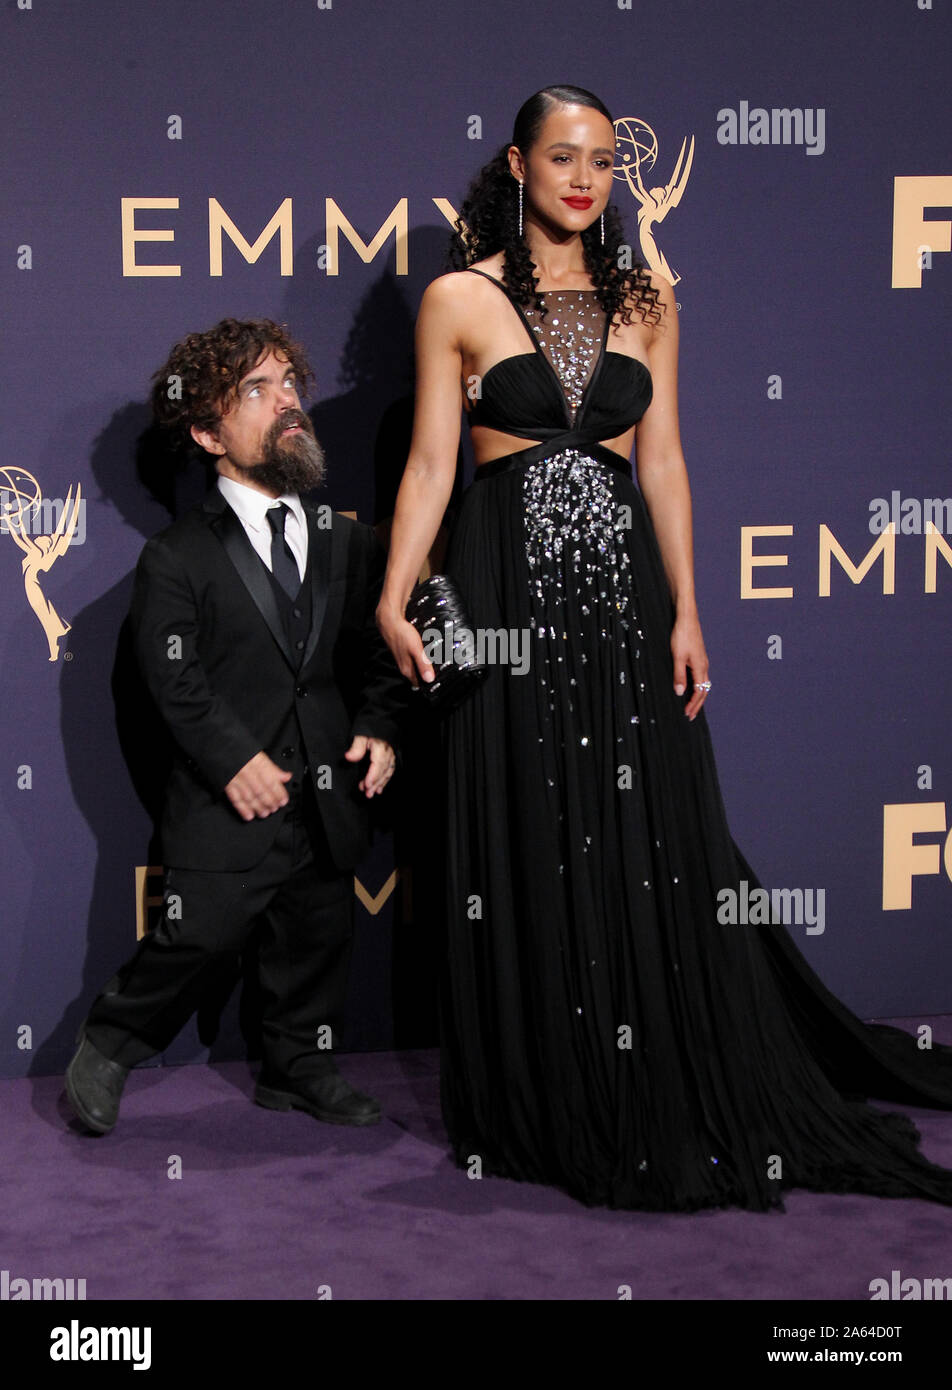 Peter Dinklage - Emmy Awards, Nominations and Wins